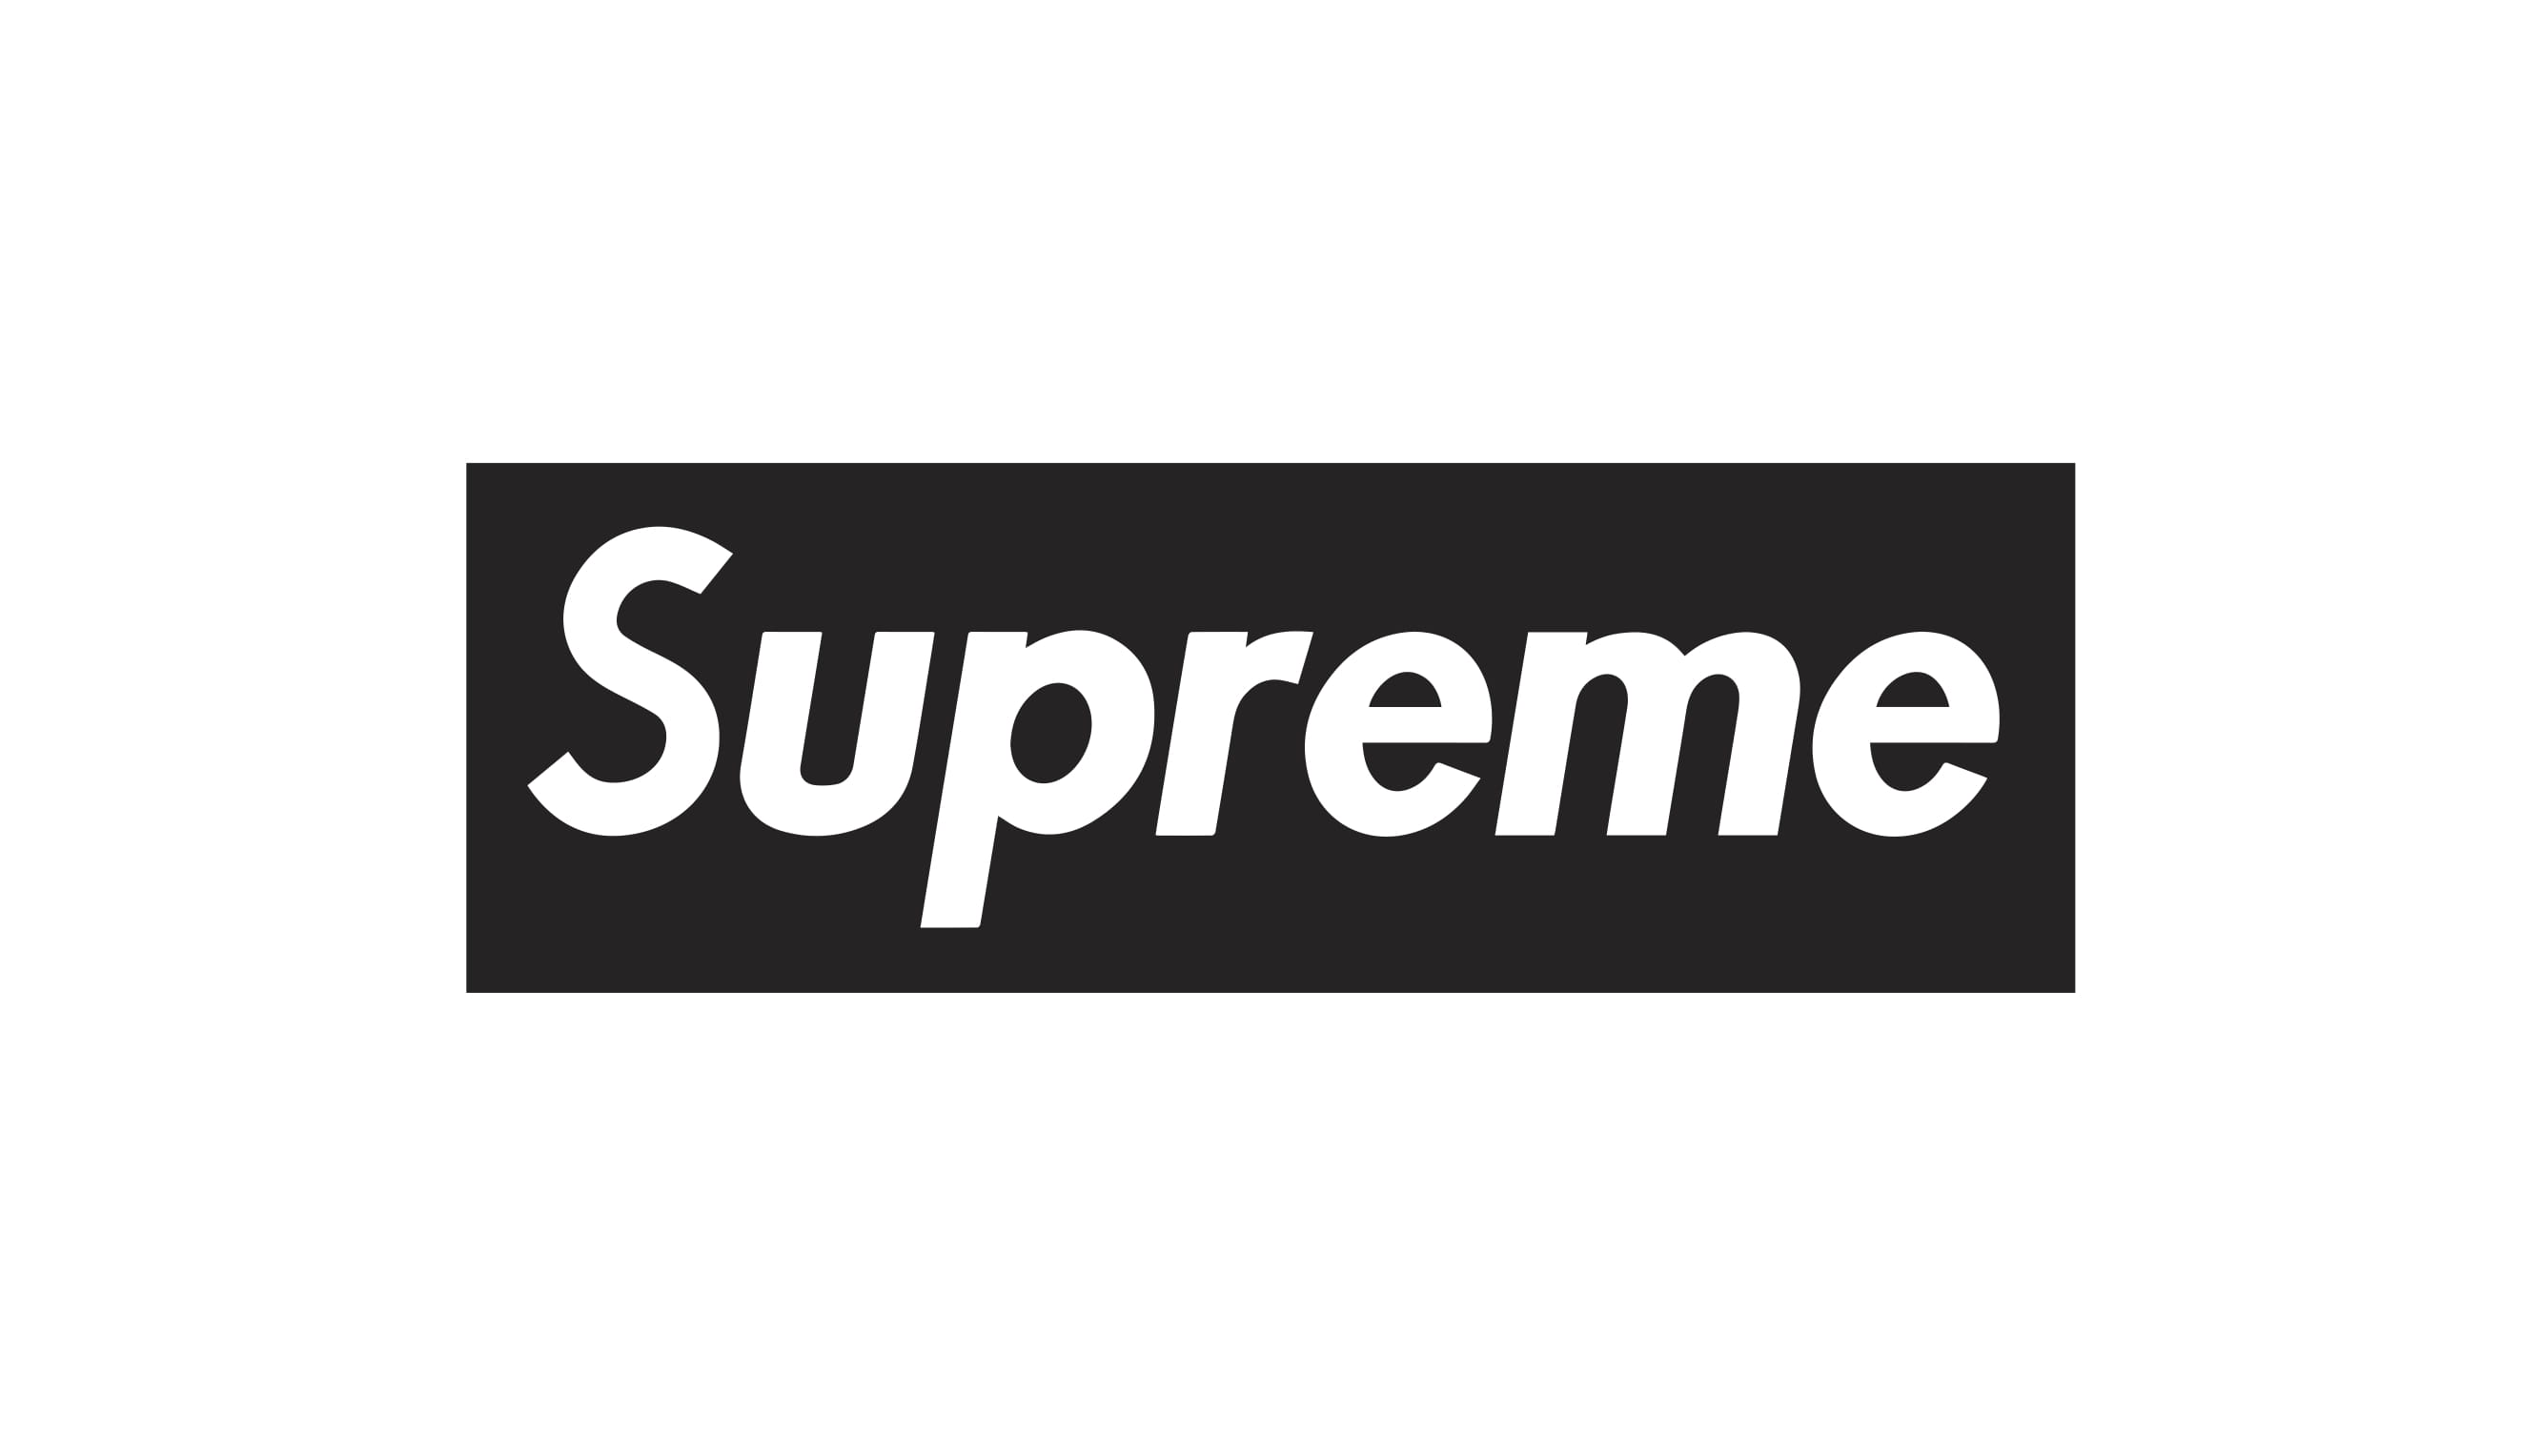 The Best Supreme Box Logo T-Shirts of All Time